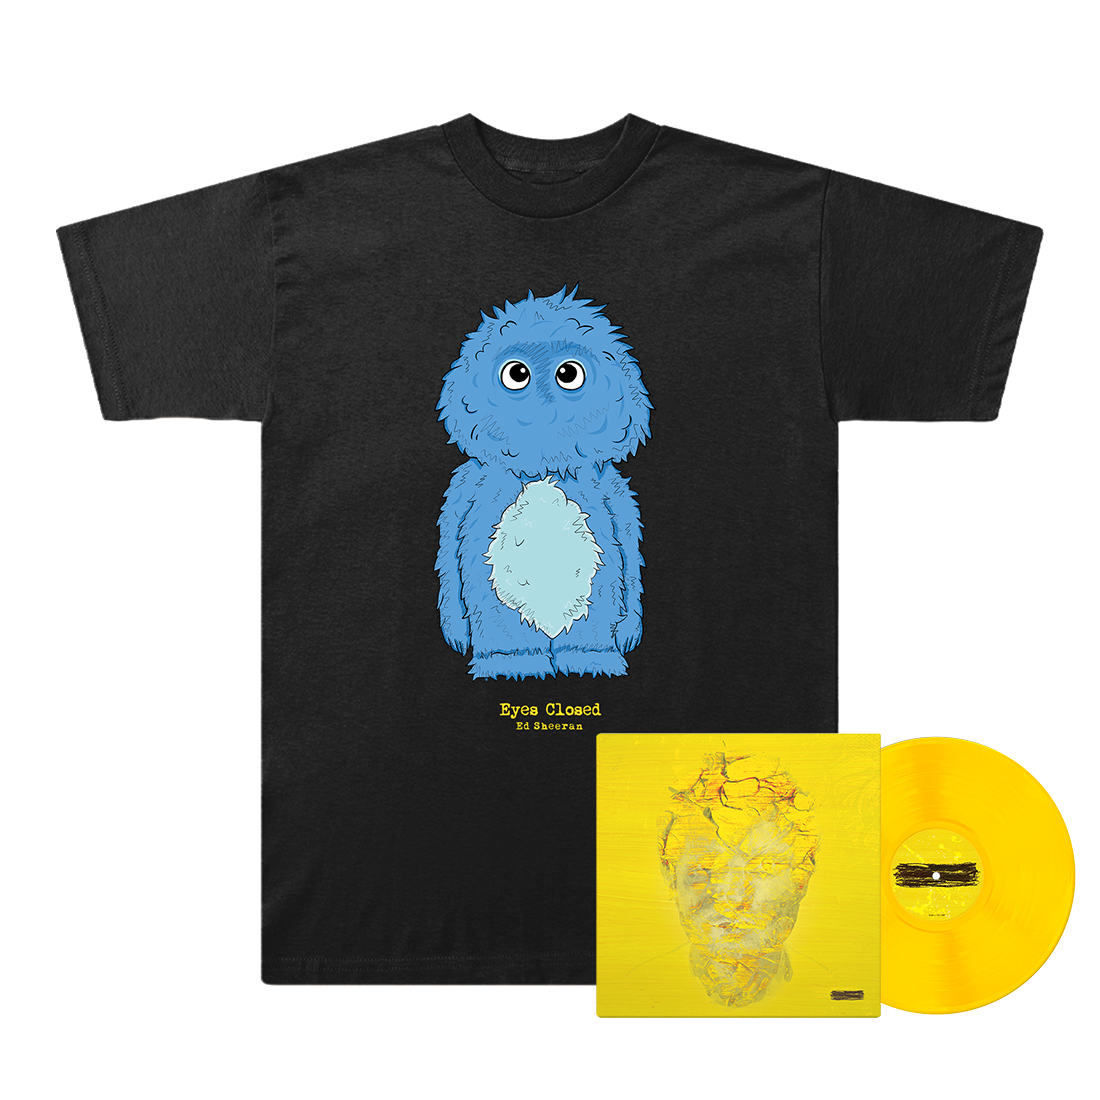 Subtract Yellow Vinyl and Monster T-Shirt